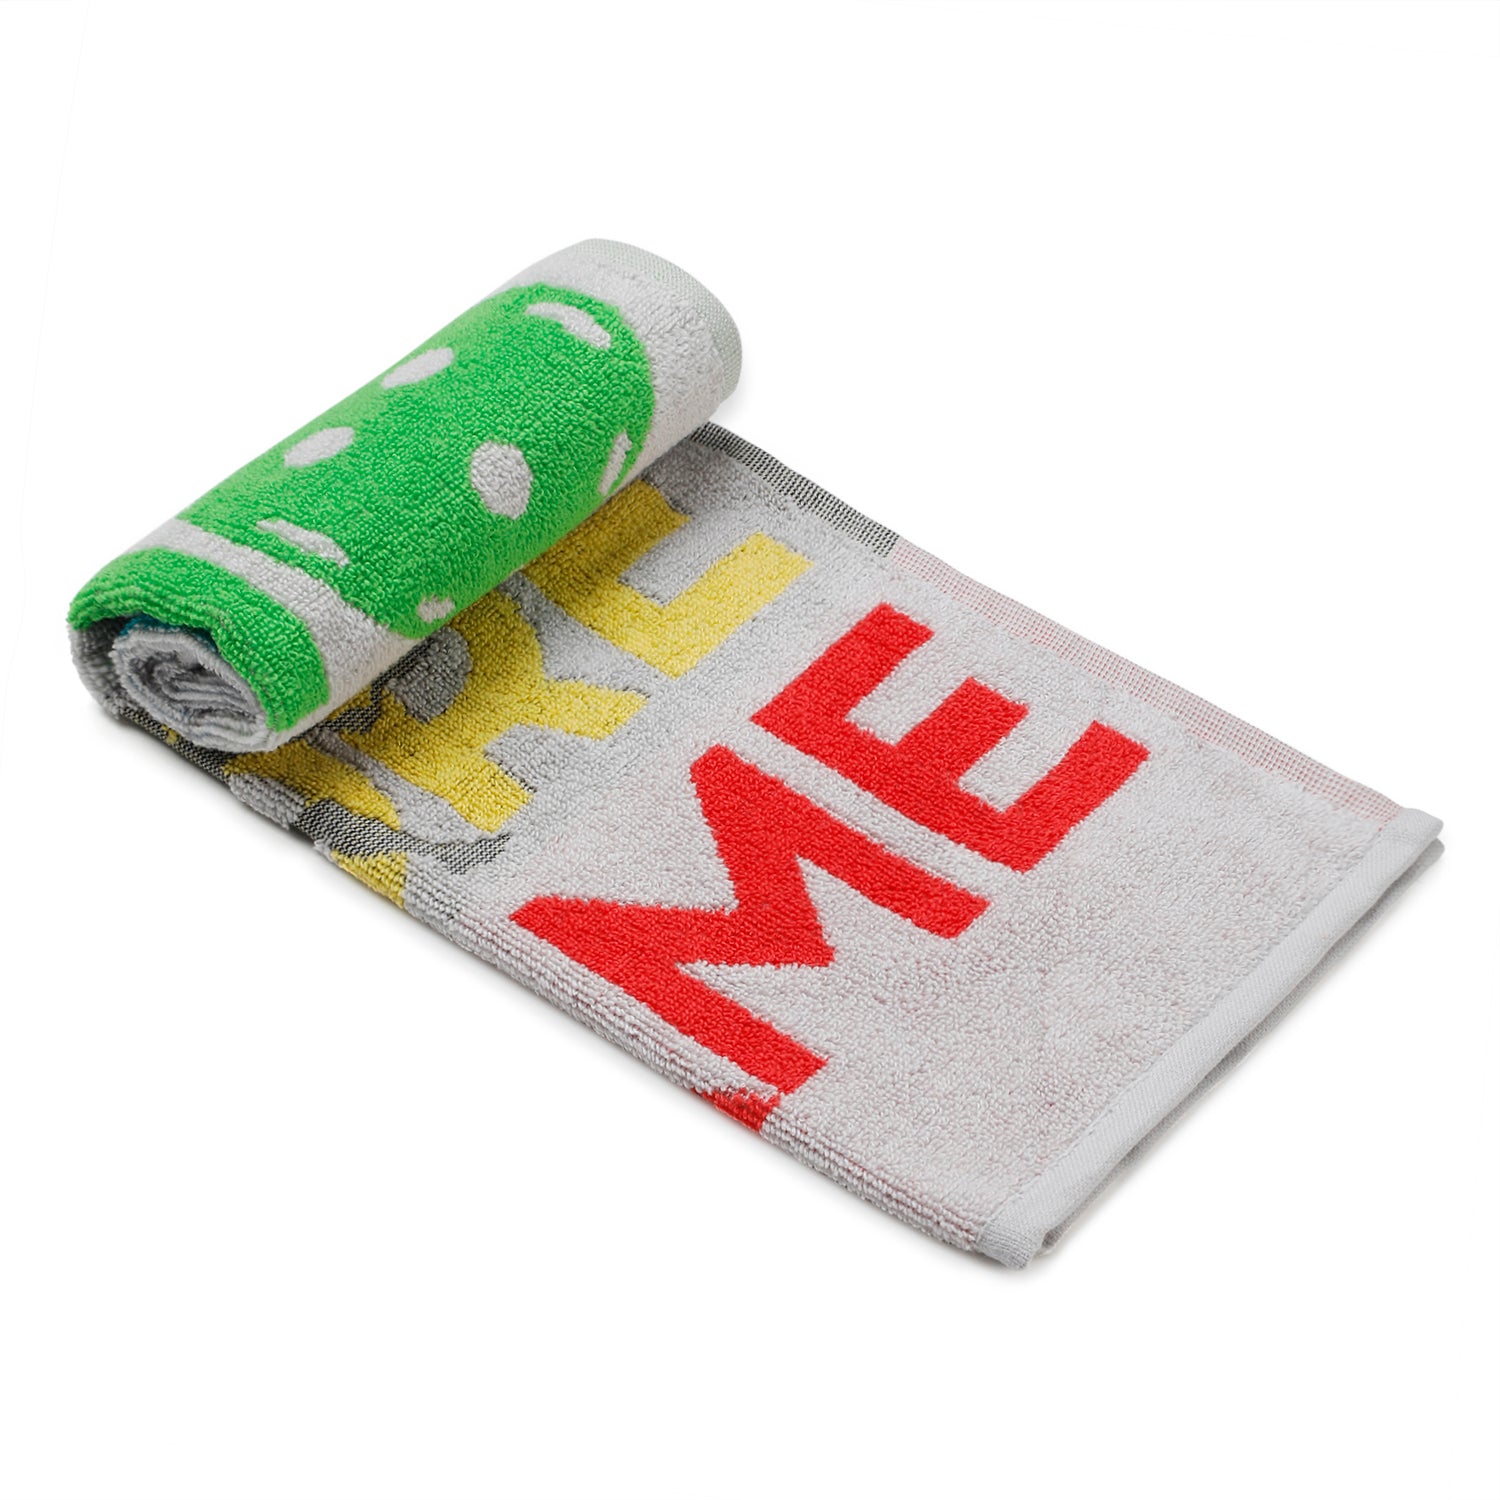 One More Game Hand Towel